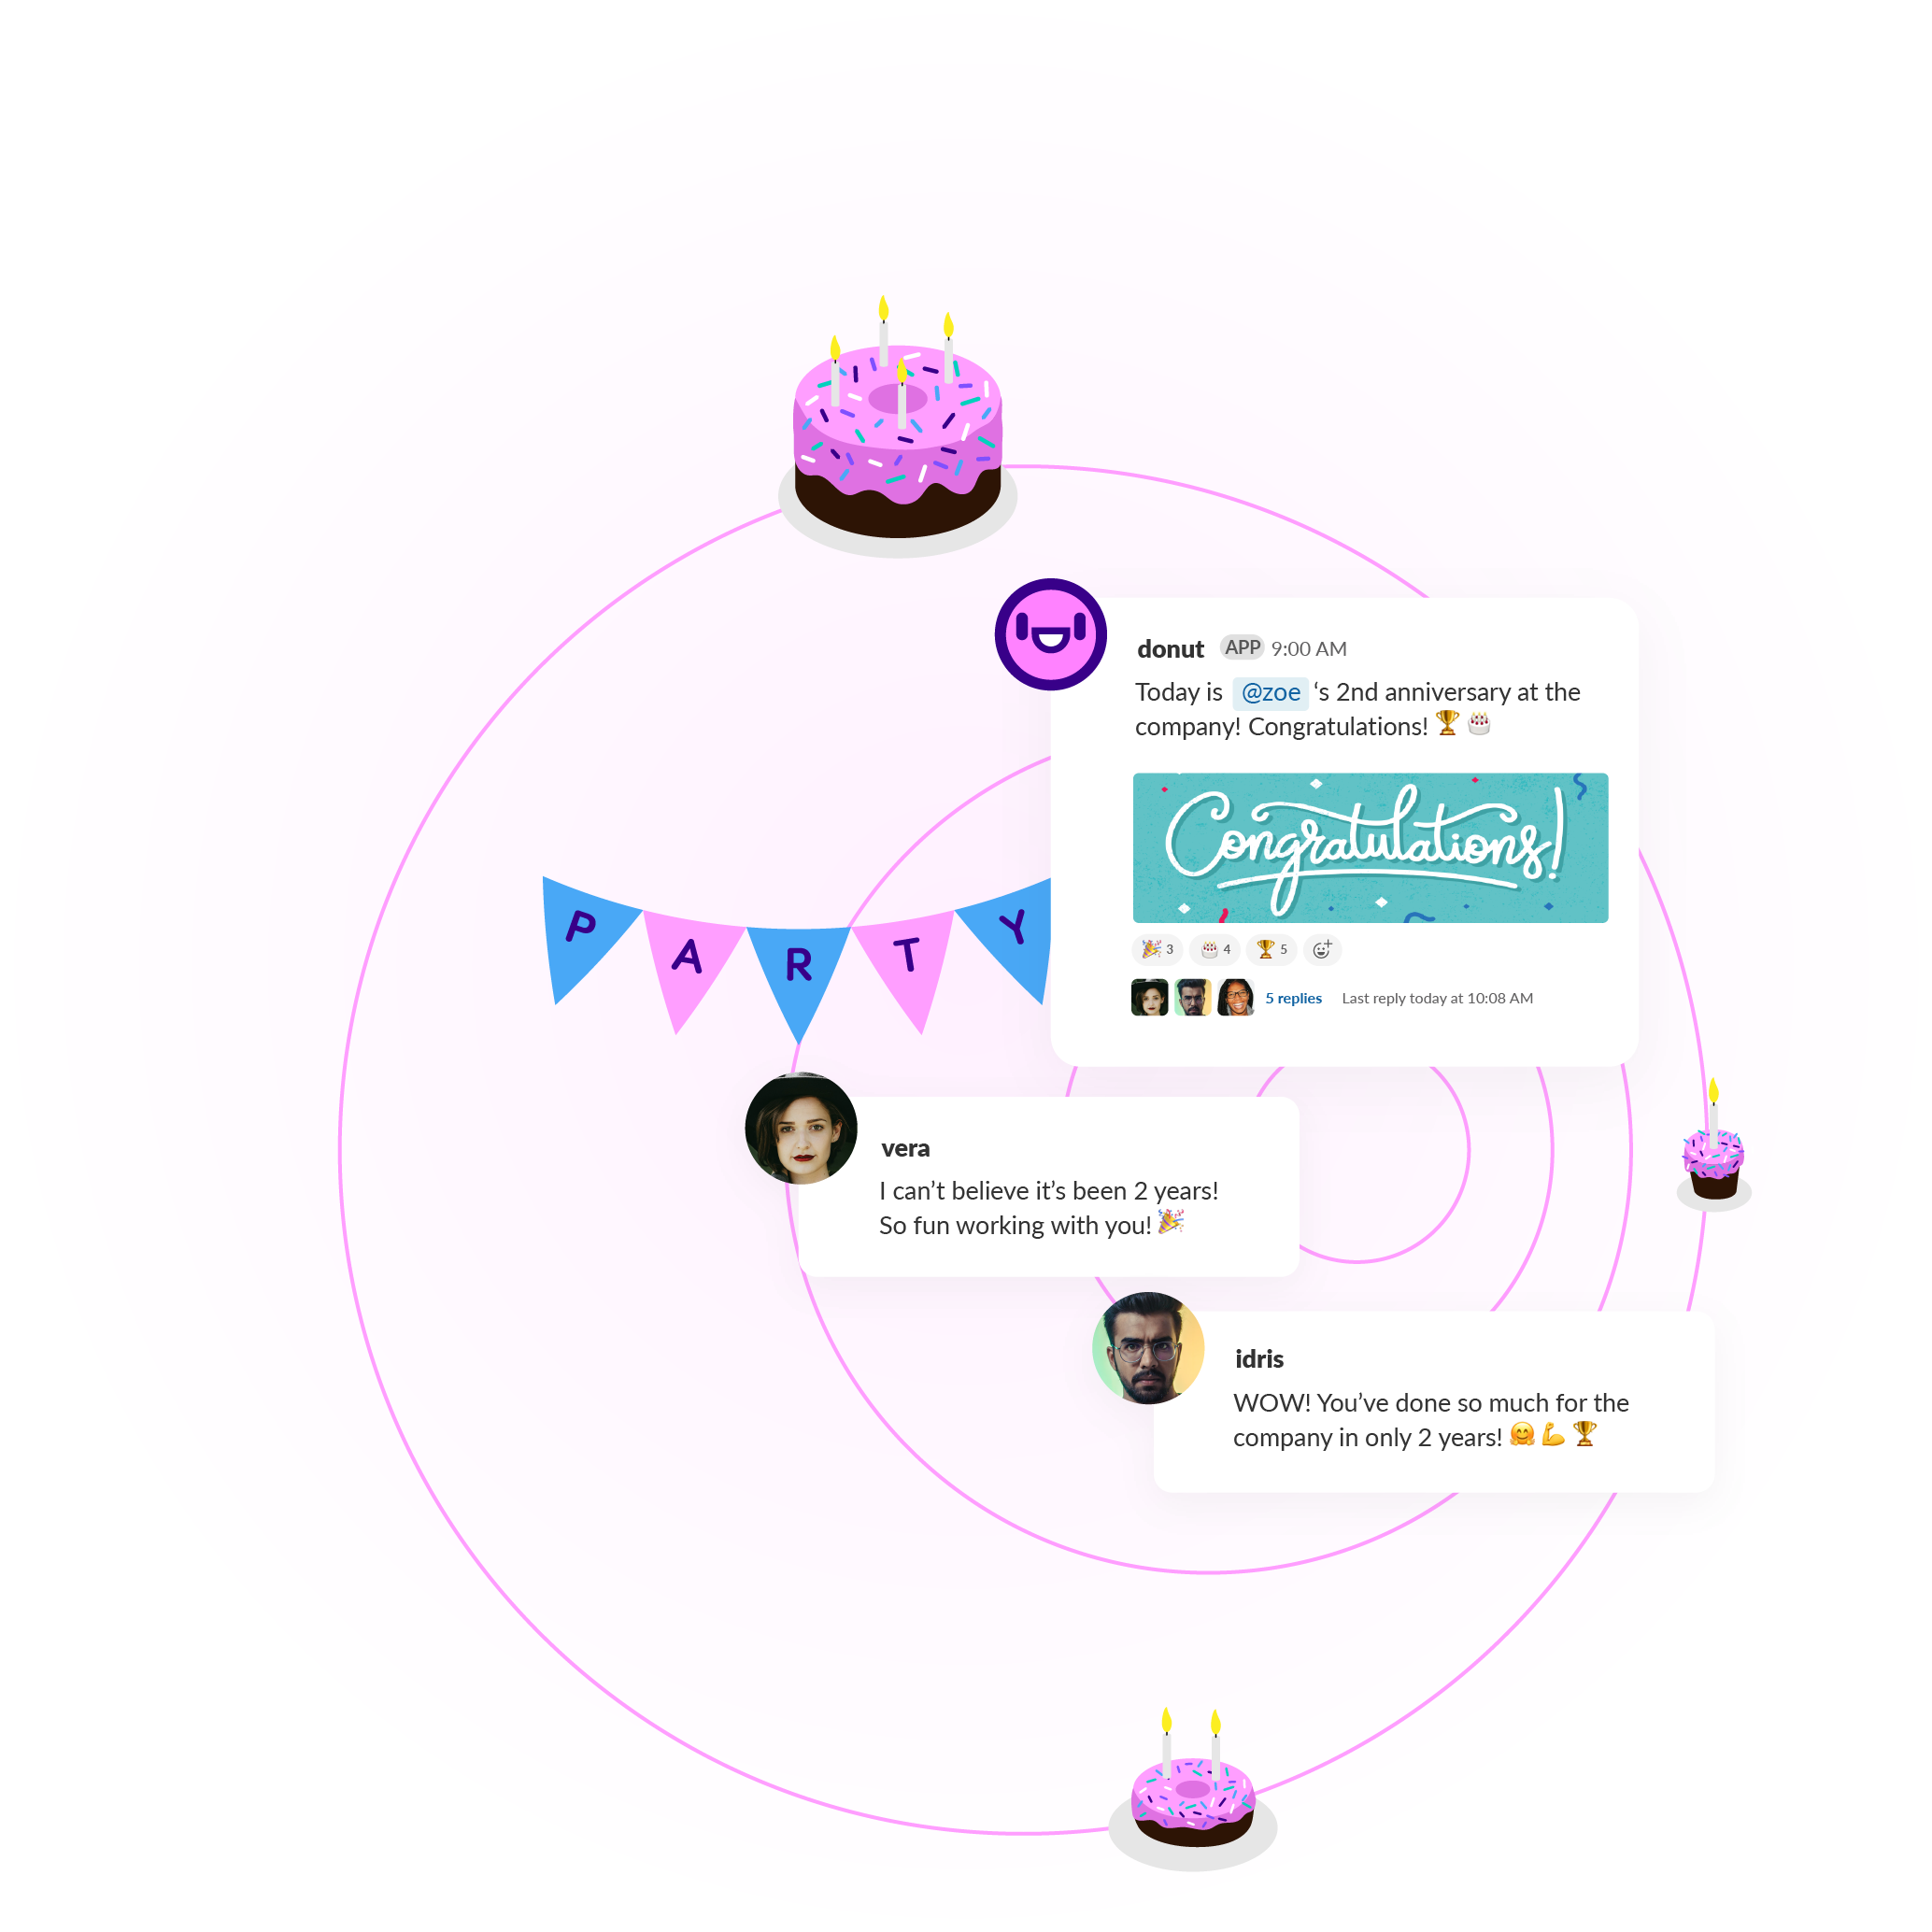 Screenshot of 3 Slack messages in a donut conversation celebrating Zoe's 2nd work anniversary. The first message is from the donut app sharing the congratulatory note. The second message from an employee replies with congratulations. The third message is from Idris expressing surprise at how much Zoe has contributed in 2 years.